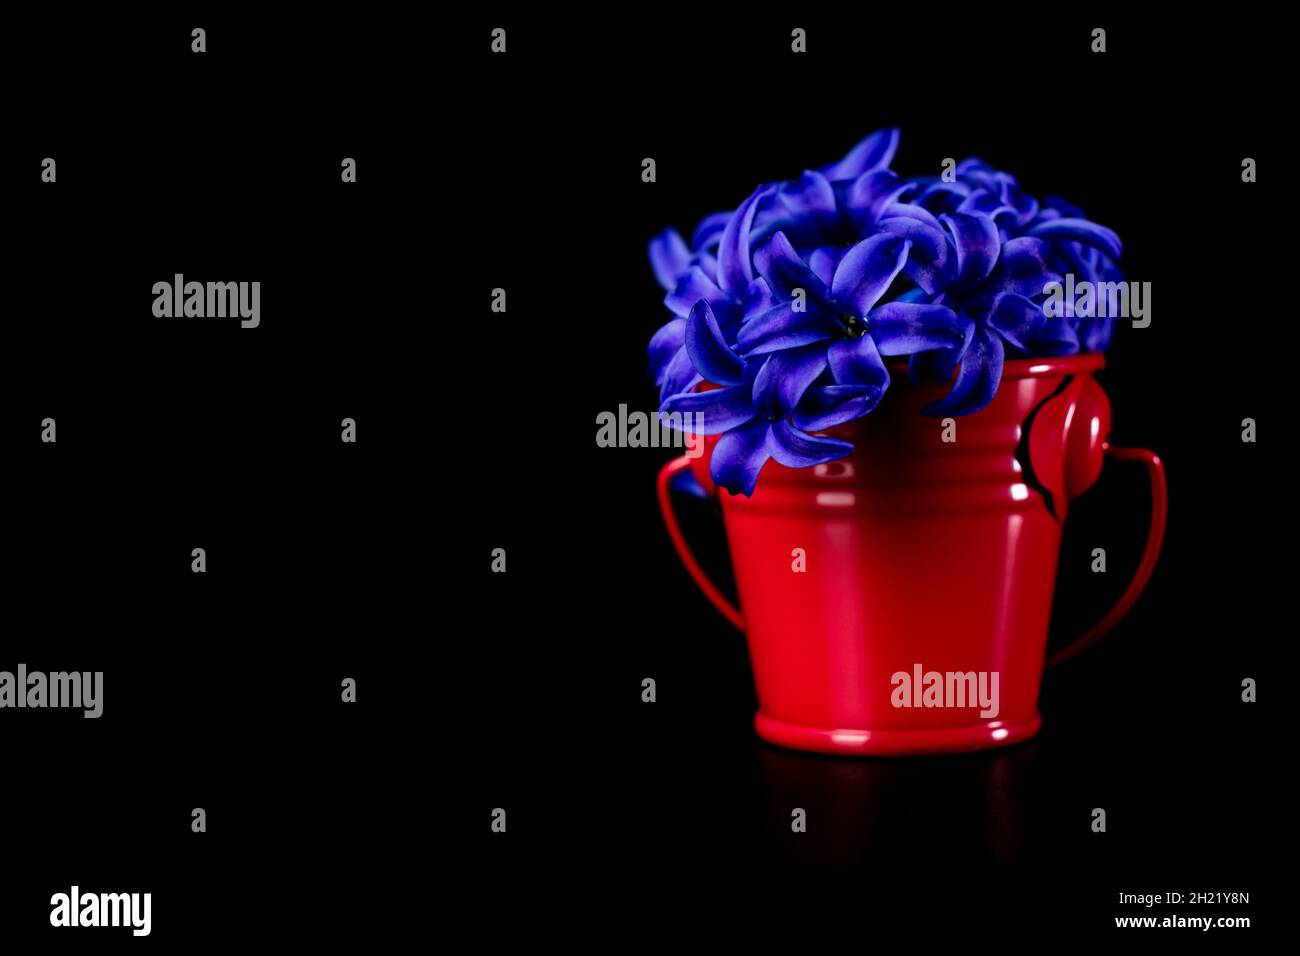 Hyacinth flowering plant in a mini decorative bucket isolated on a black background Stock Photo